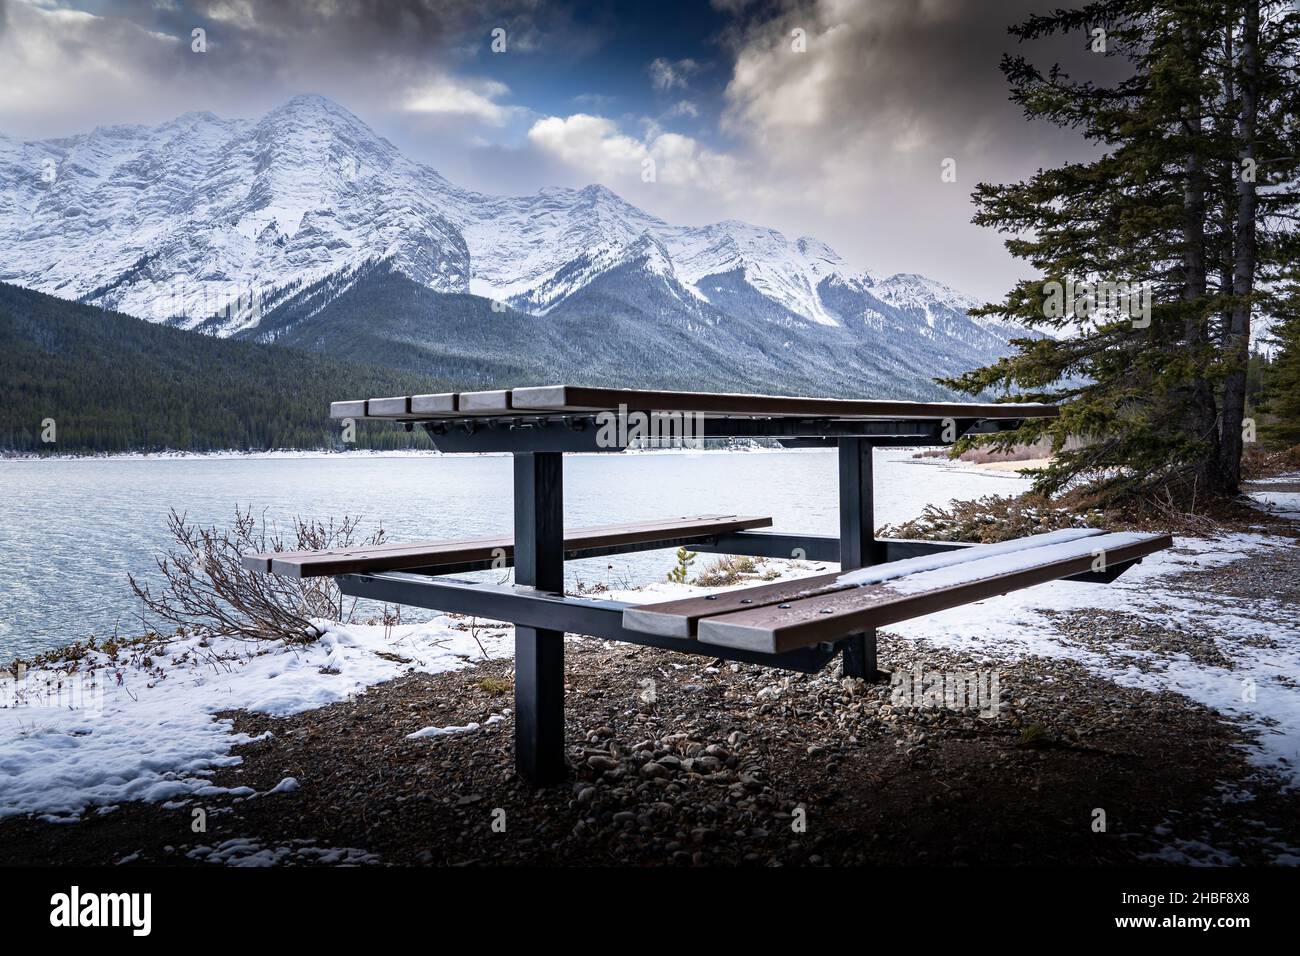 A wooden picnic table overlooking the Spray Lakes in the Canadian Rocky Mountains near Banff. Stock Photo